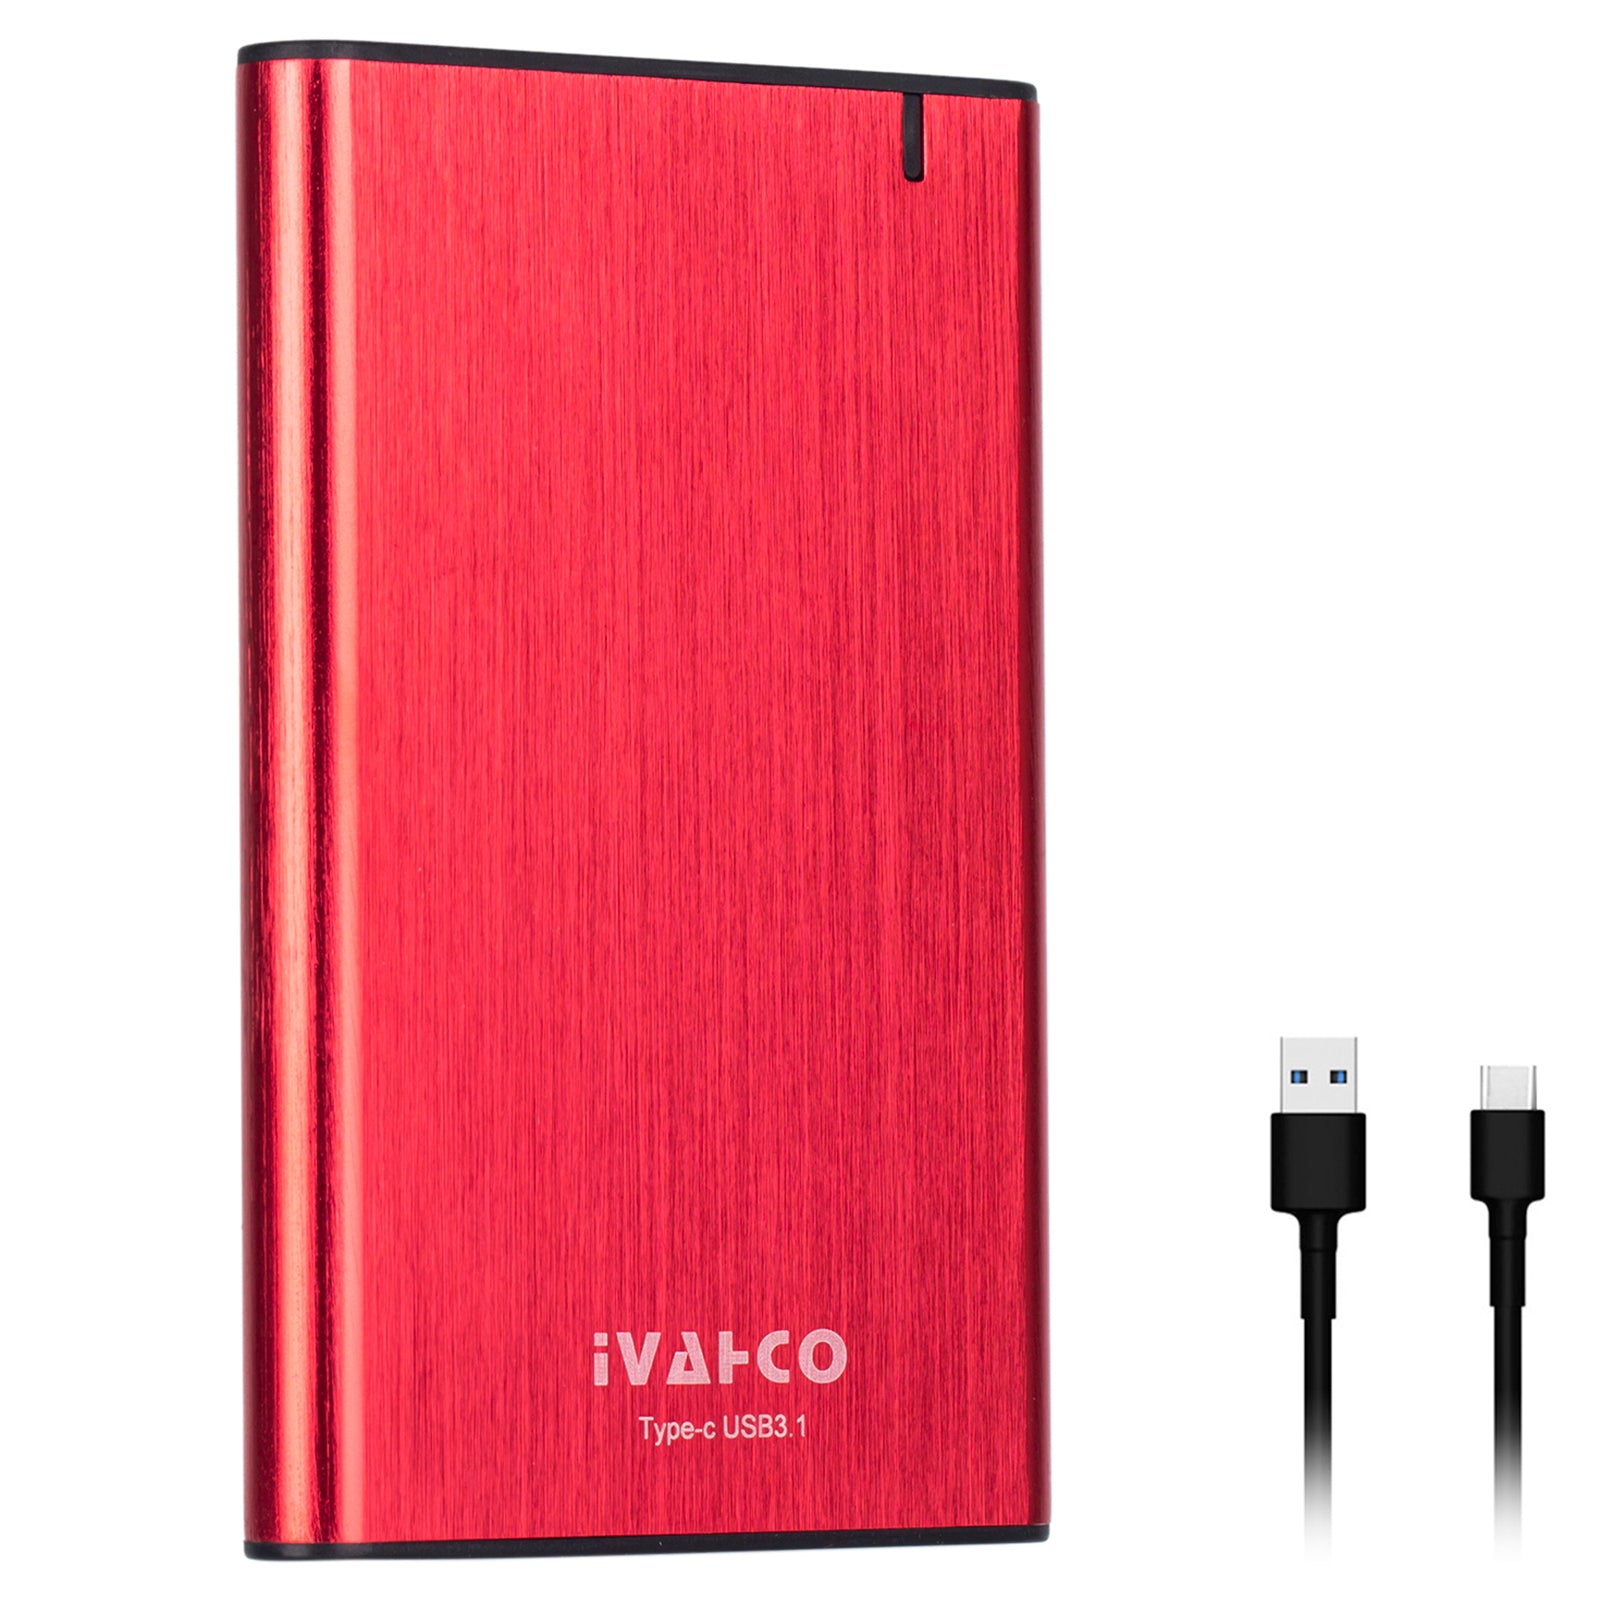 IVAHCO 1TB Type-C USB3.1 2.5" HDD External Case Plug and Play Brushed Metal Solid State Drive Enclosure - Red